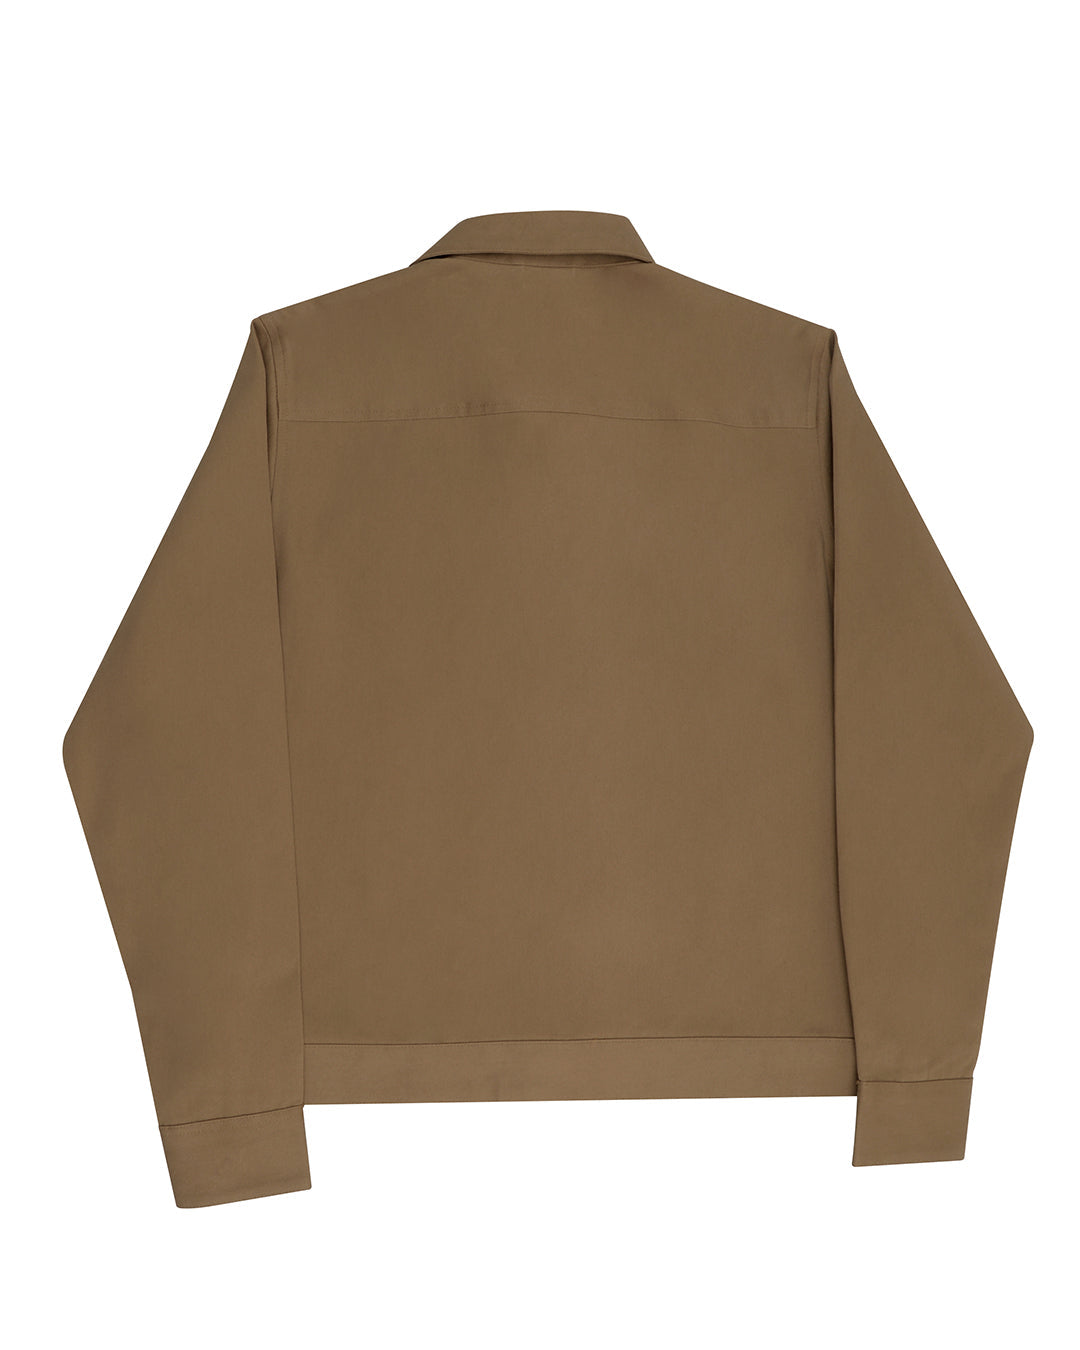 Back of the twill shirt jacket for men by Luxire in khaki